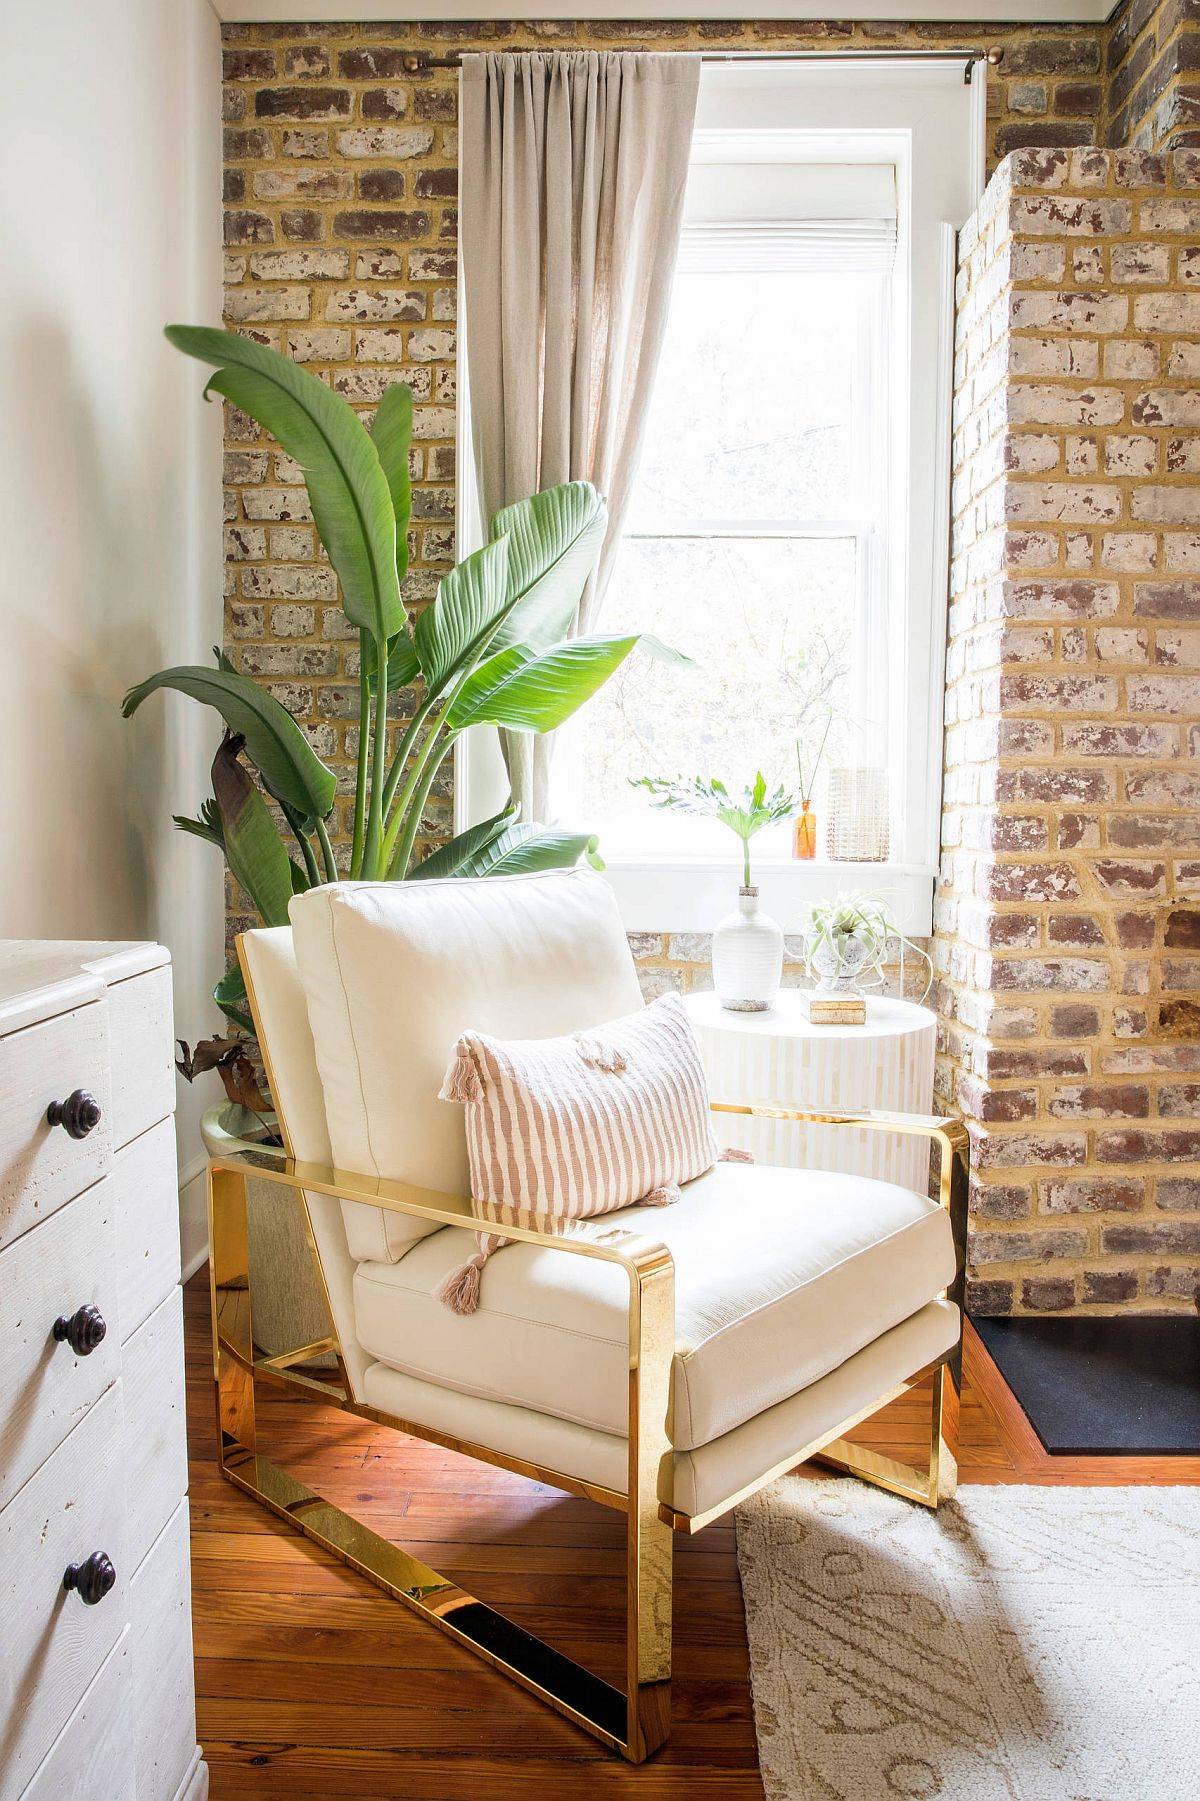 Decorating the corner of the modern industrial bedroom with a comfy chair and an indoor plant